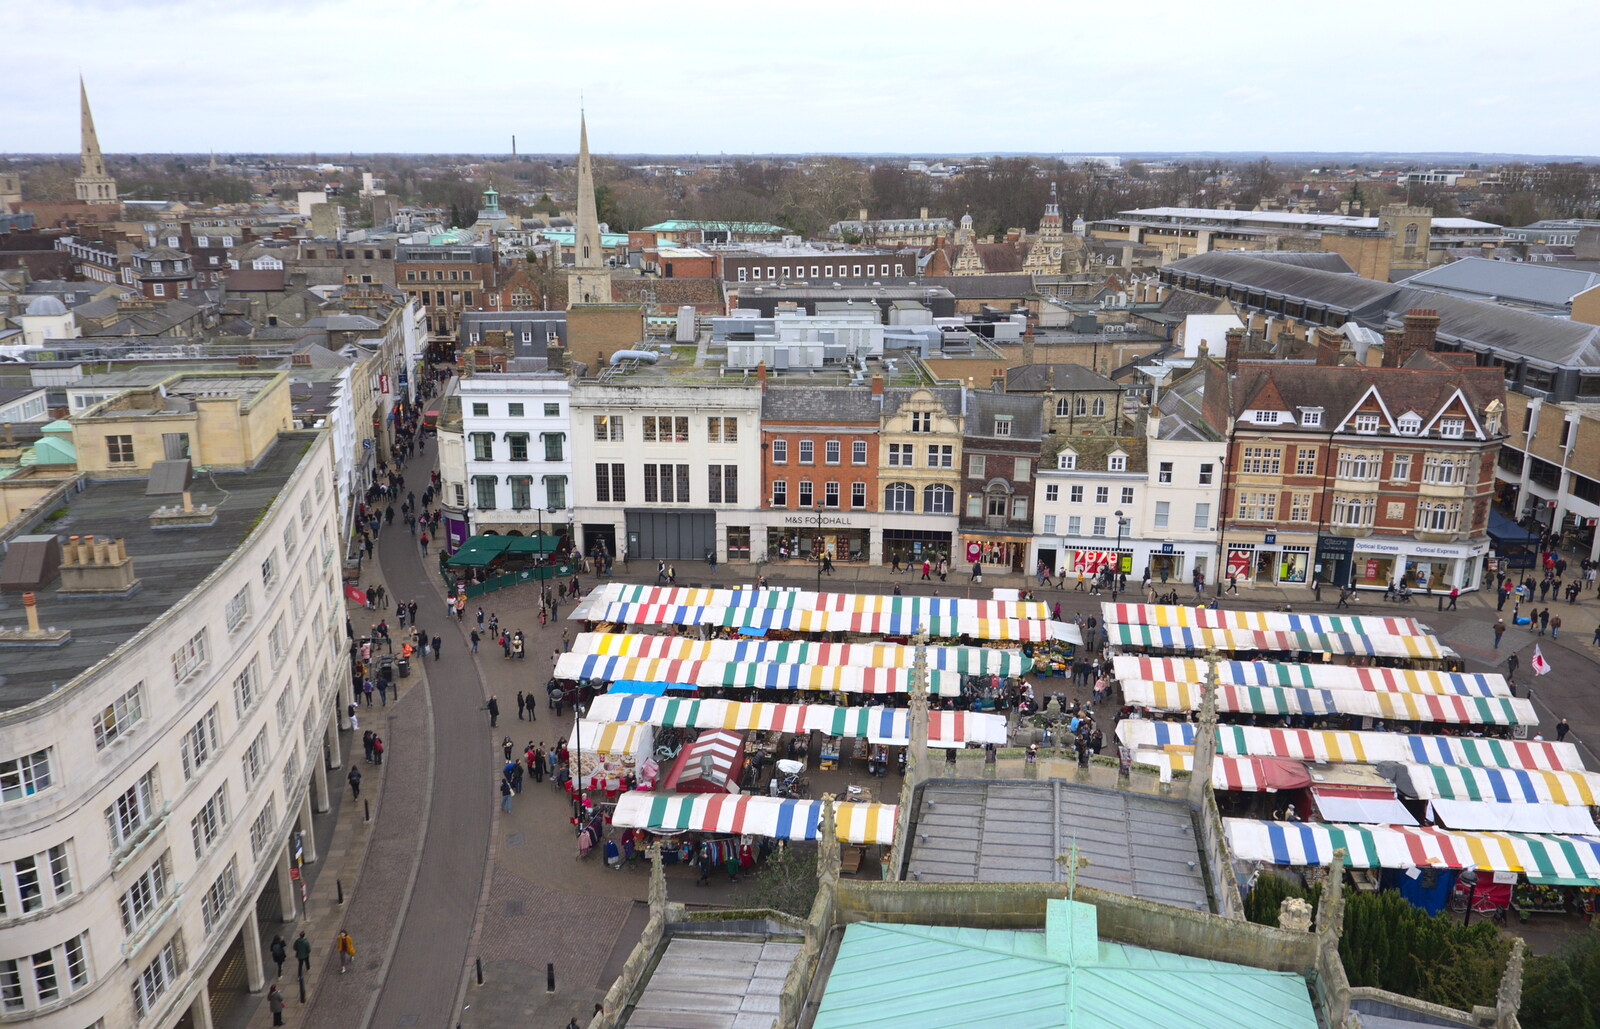 The view of the market from the church tower from The SwiftKey Reunion Brunch, Regent Street, Cambridge - 12th January 2019